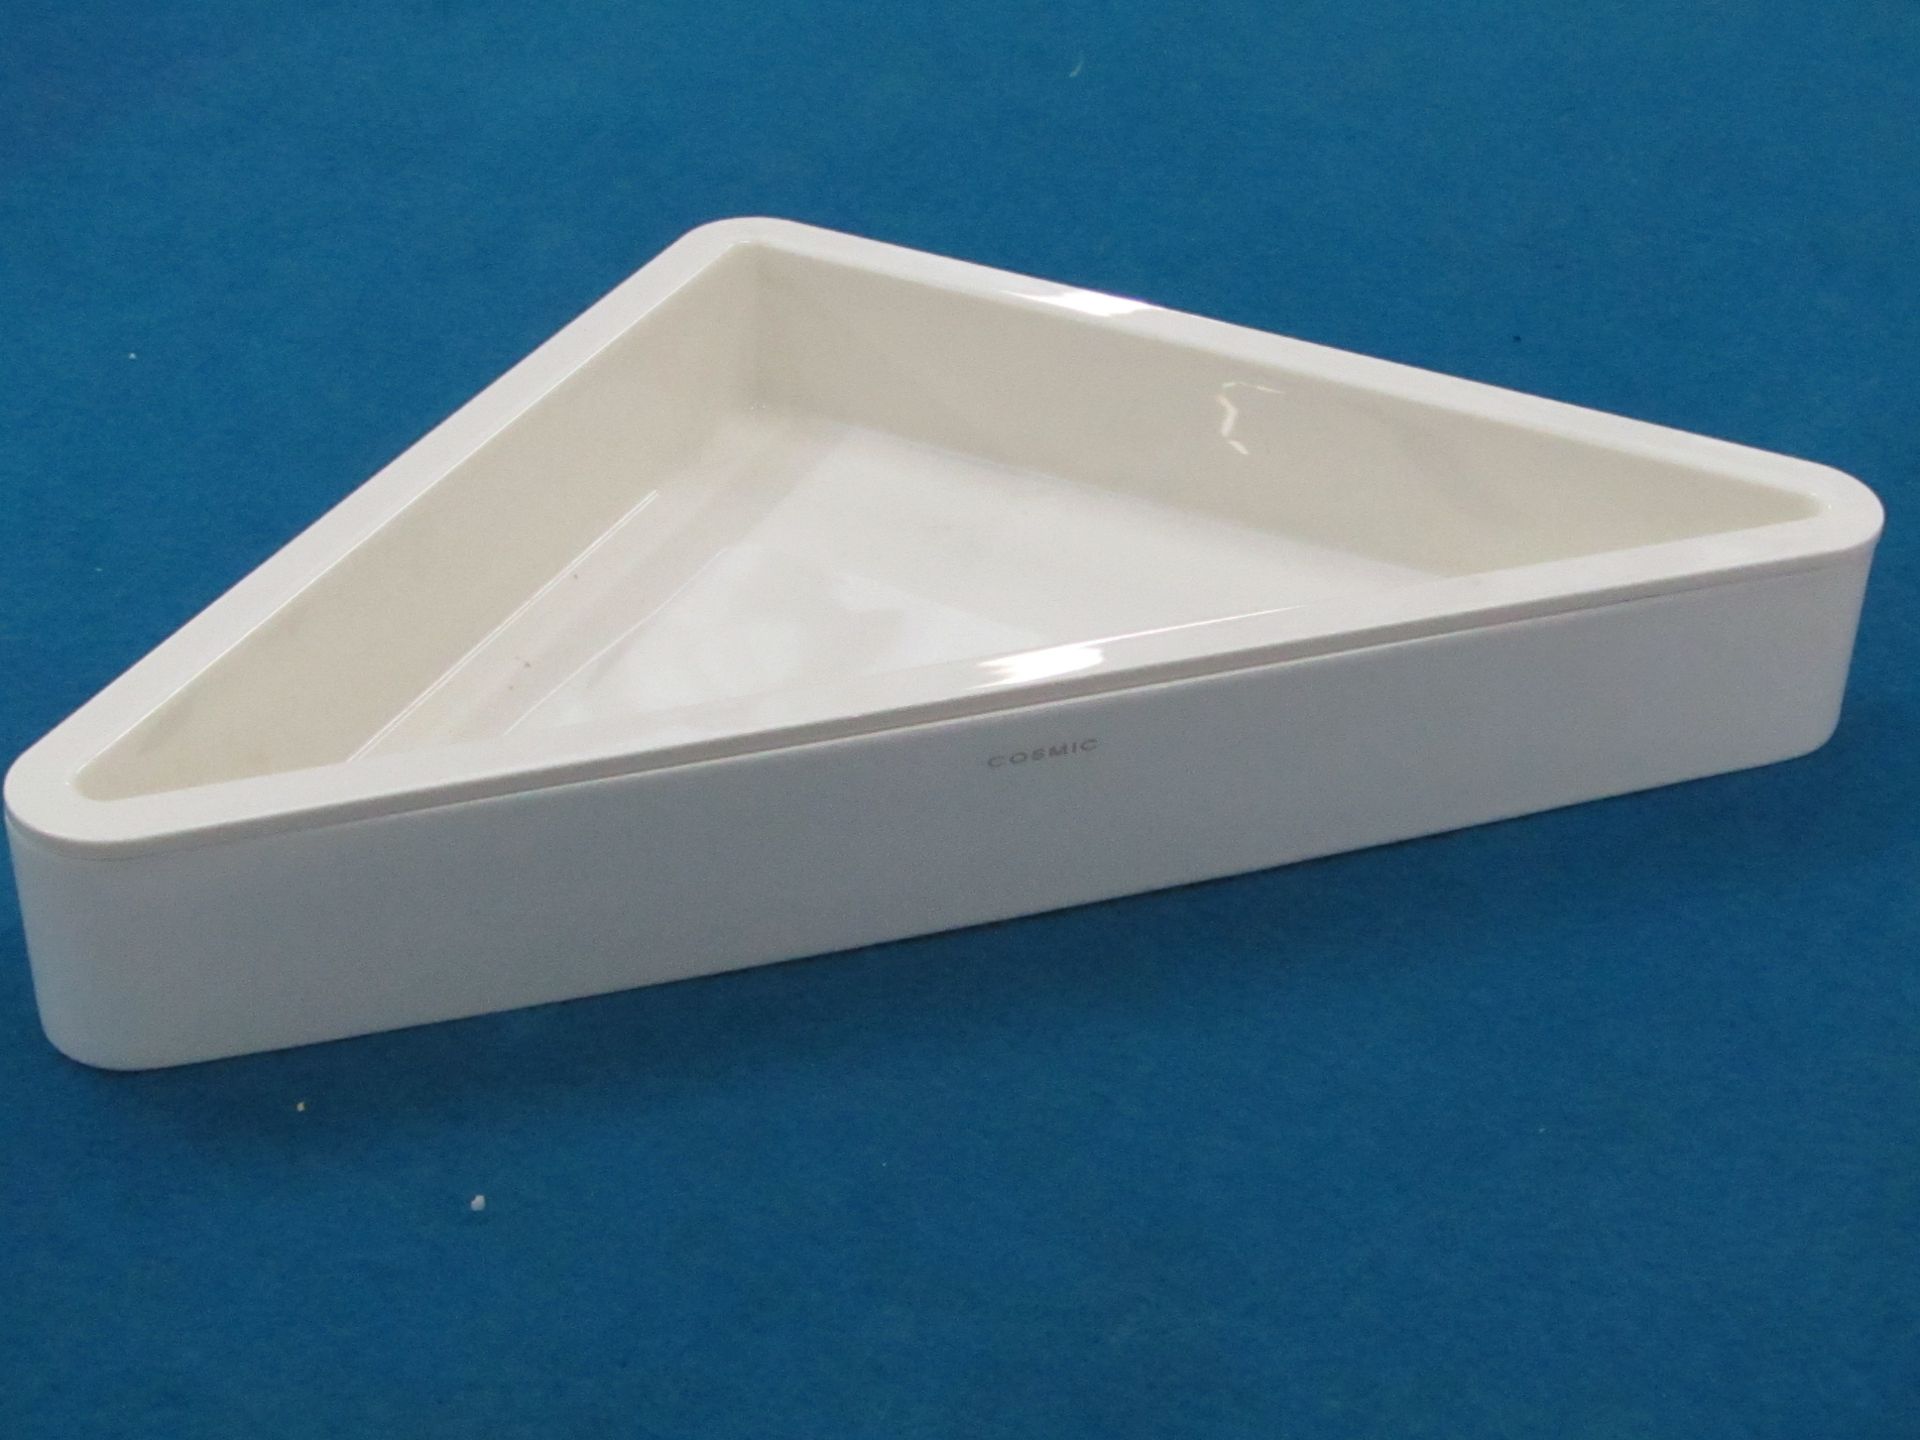 Cosmic BWC Glossy white corner basket with white lining, new and boxed